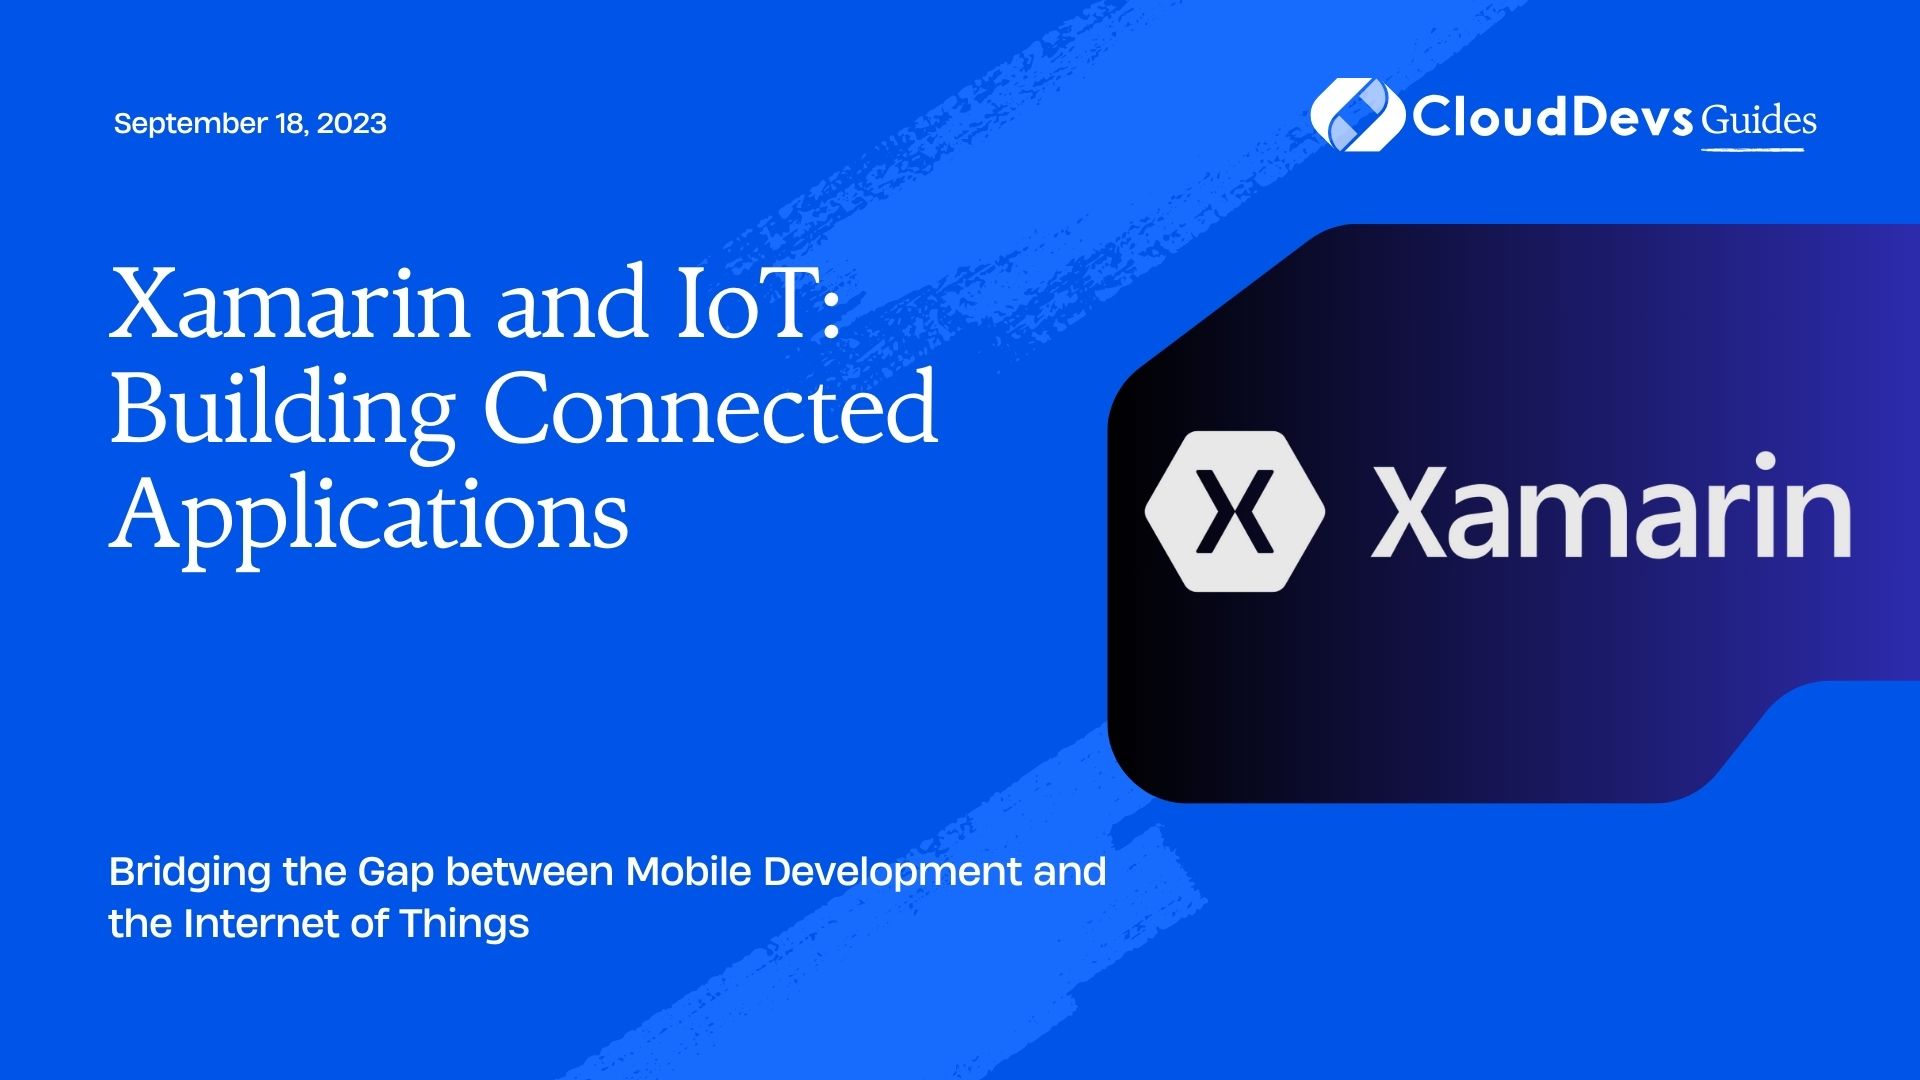 Xamarin and IoT: Building Connected Applications